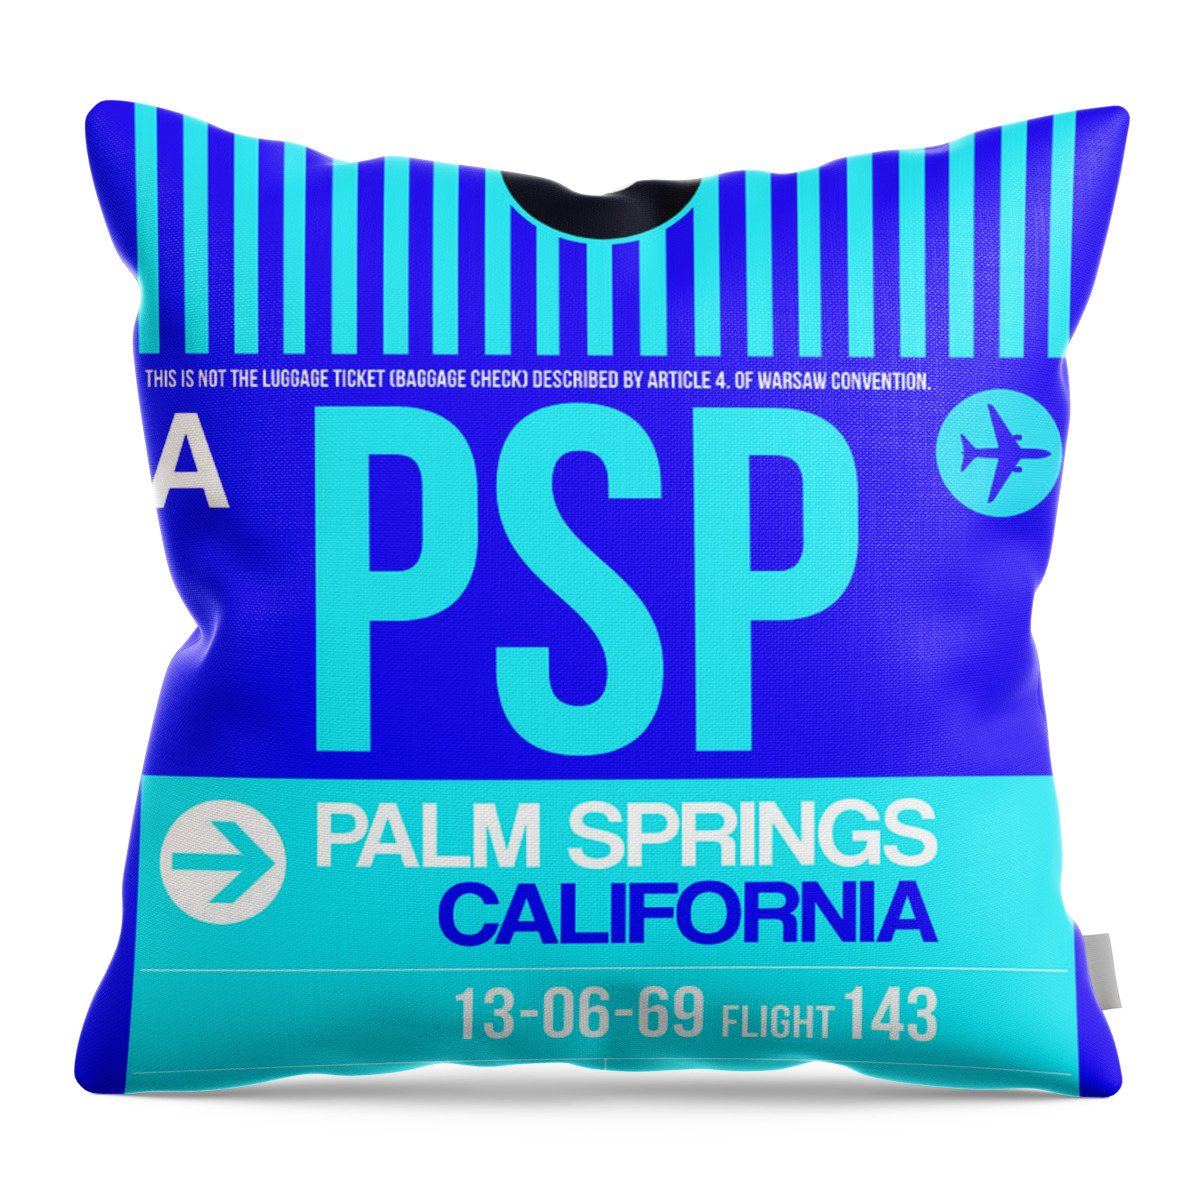 Palm Springs Throw Pillow featuring the digital art PSP Palm Springs Luggage Tag II by Naxart Studio